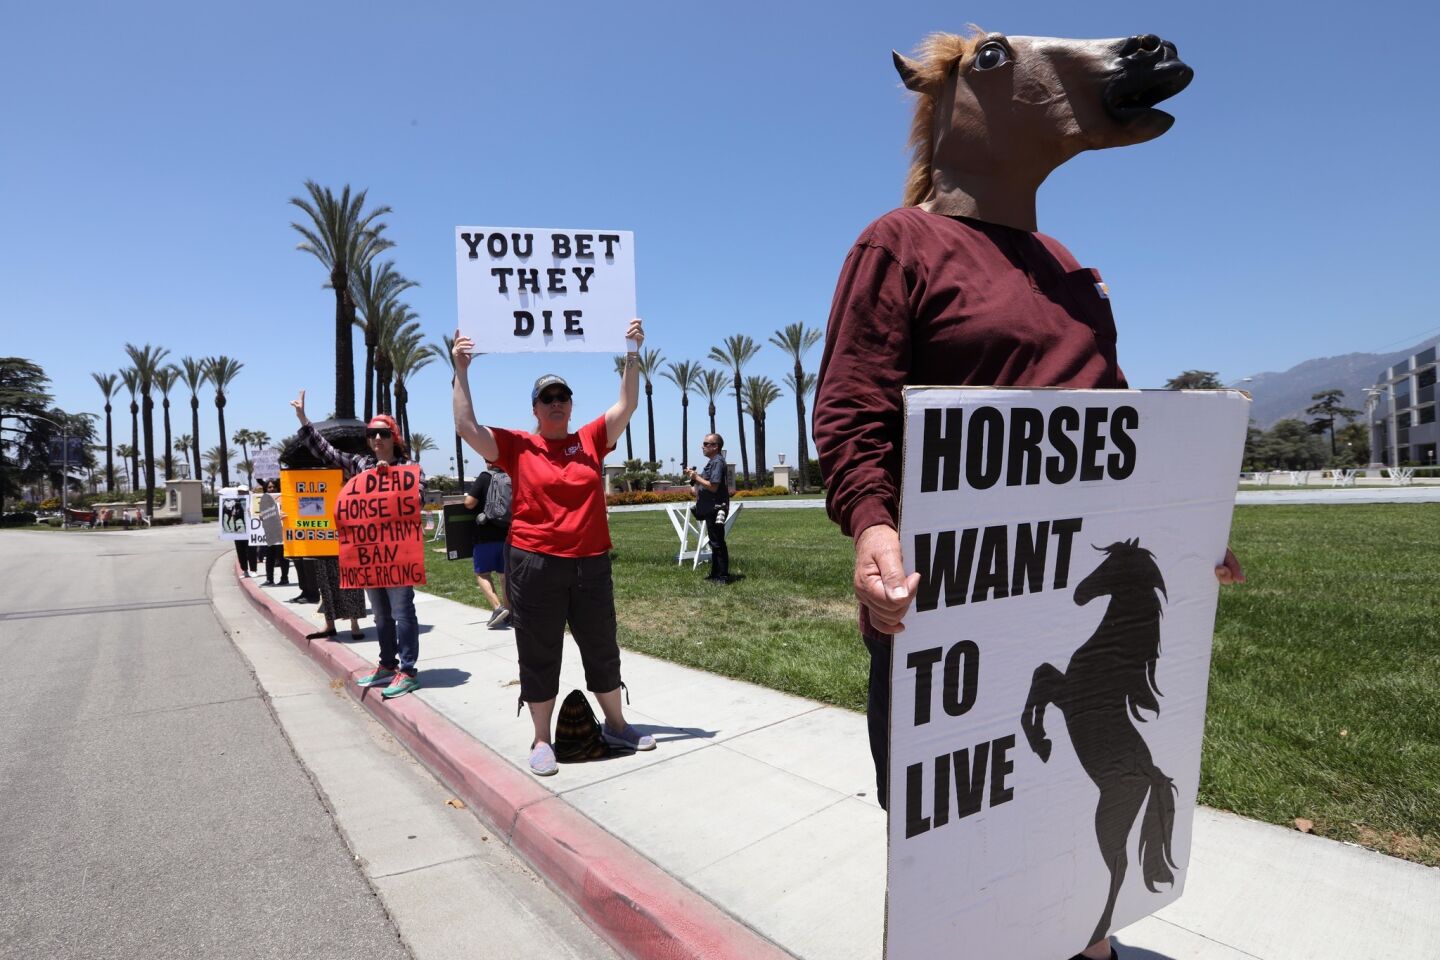 Robert Penney wears a horse mask while protesting with animal rights activists outside Gate 5 at Santa Anita Park in Arcadia on June 23. Thirty horses died at Santa Anita from Dec. 26-June 23, 2019.